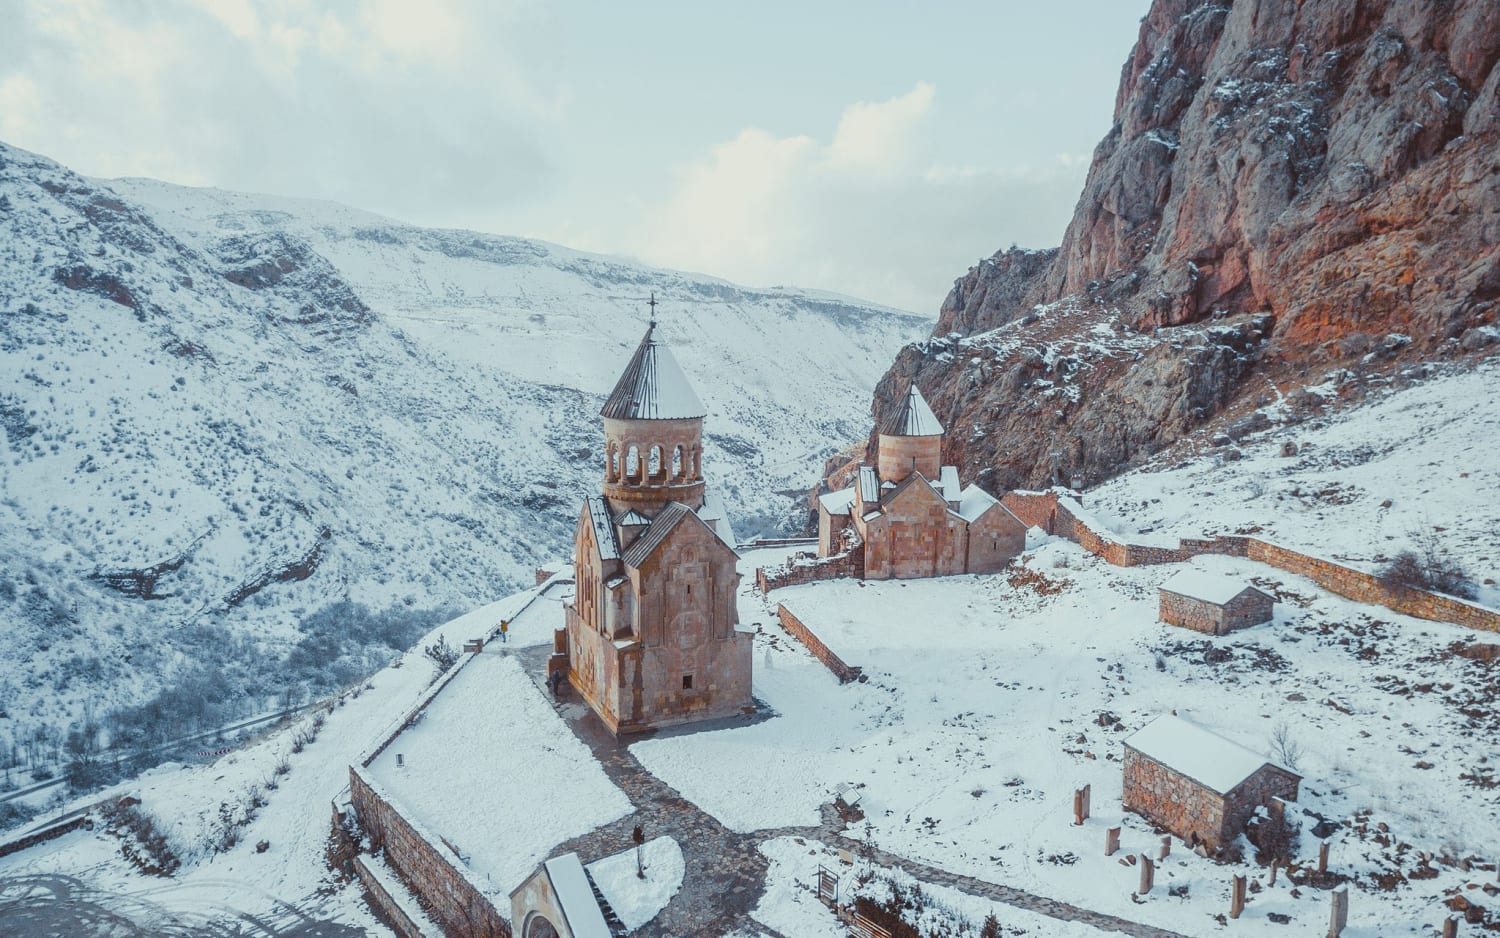 Noravank is a 13th-century Armenian monastery, located 122 km from Yerevan in a narrow gorge made by the Amaghu River, near the town of Yeghegnadzor, Armenia